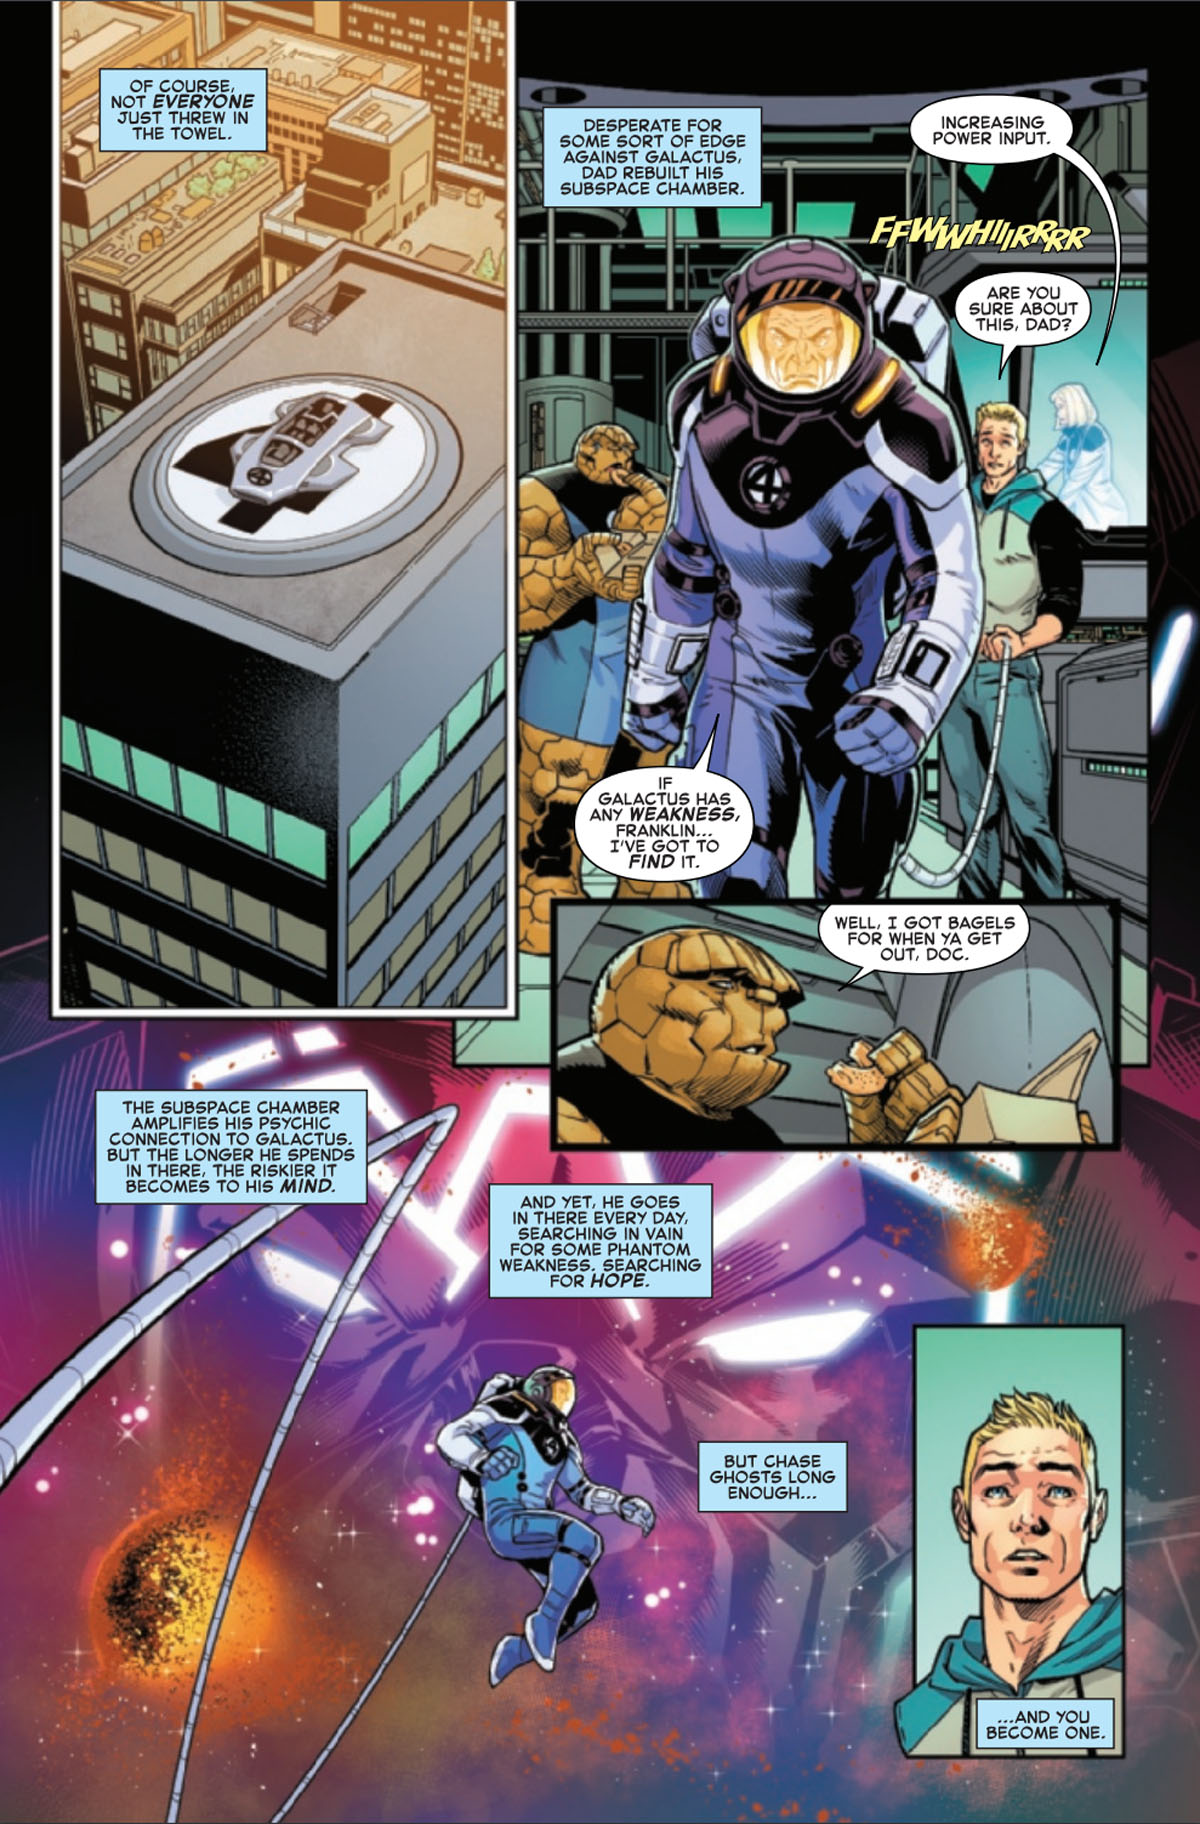 Fantastic Four: Life Story #5 page 2